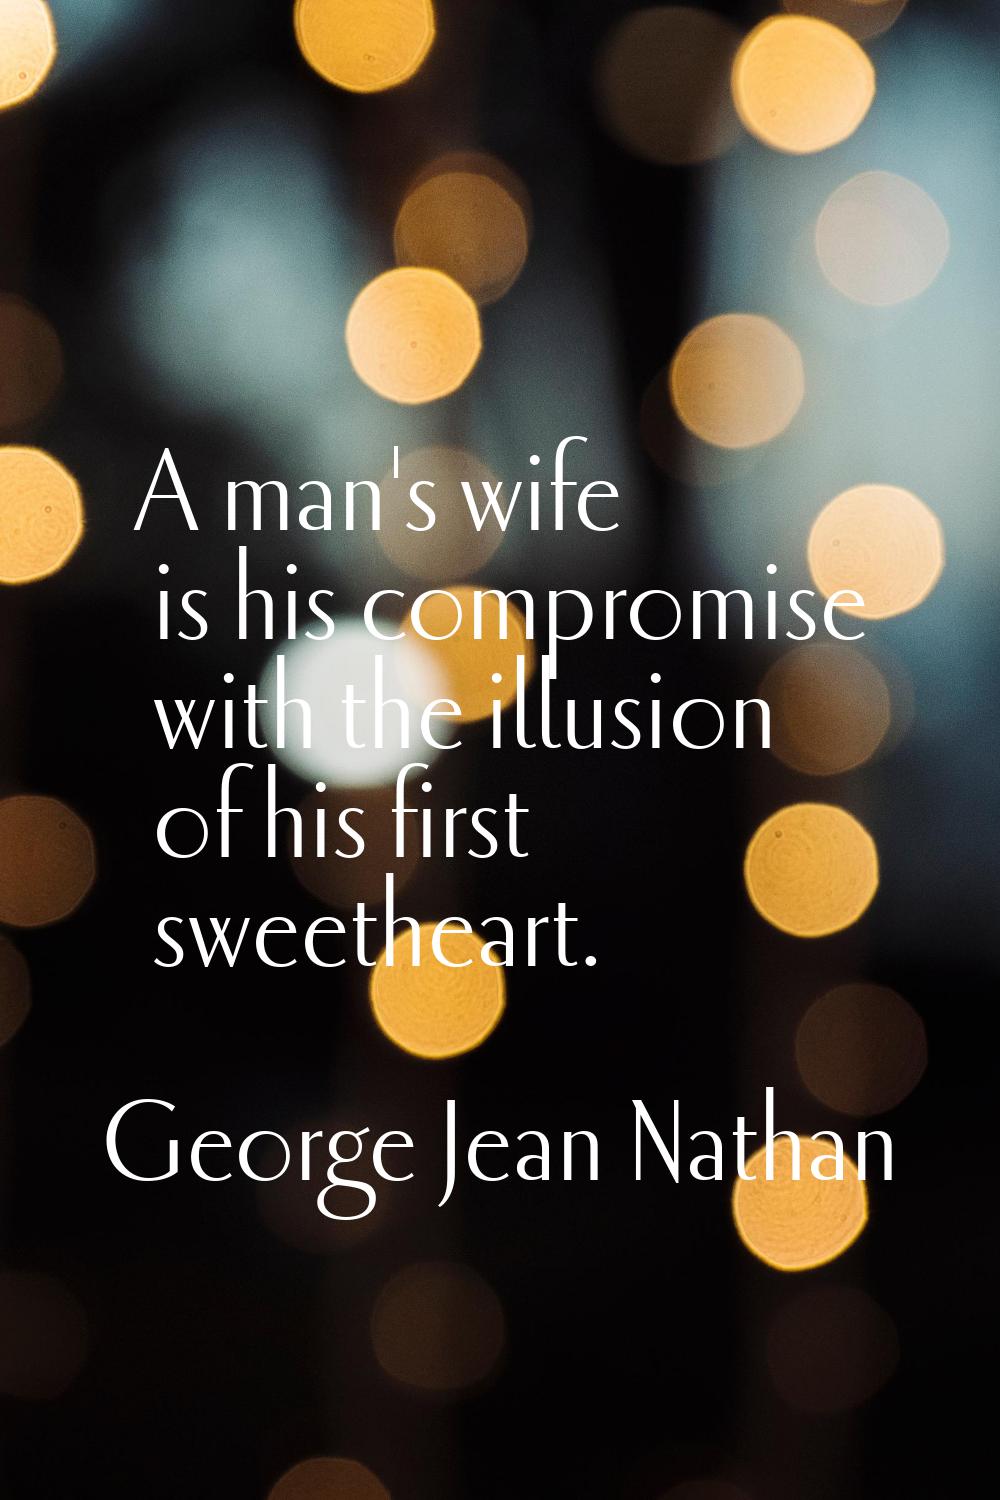 A man's wife is his compromise with the illusion of his first sweetheart.